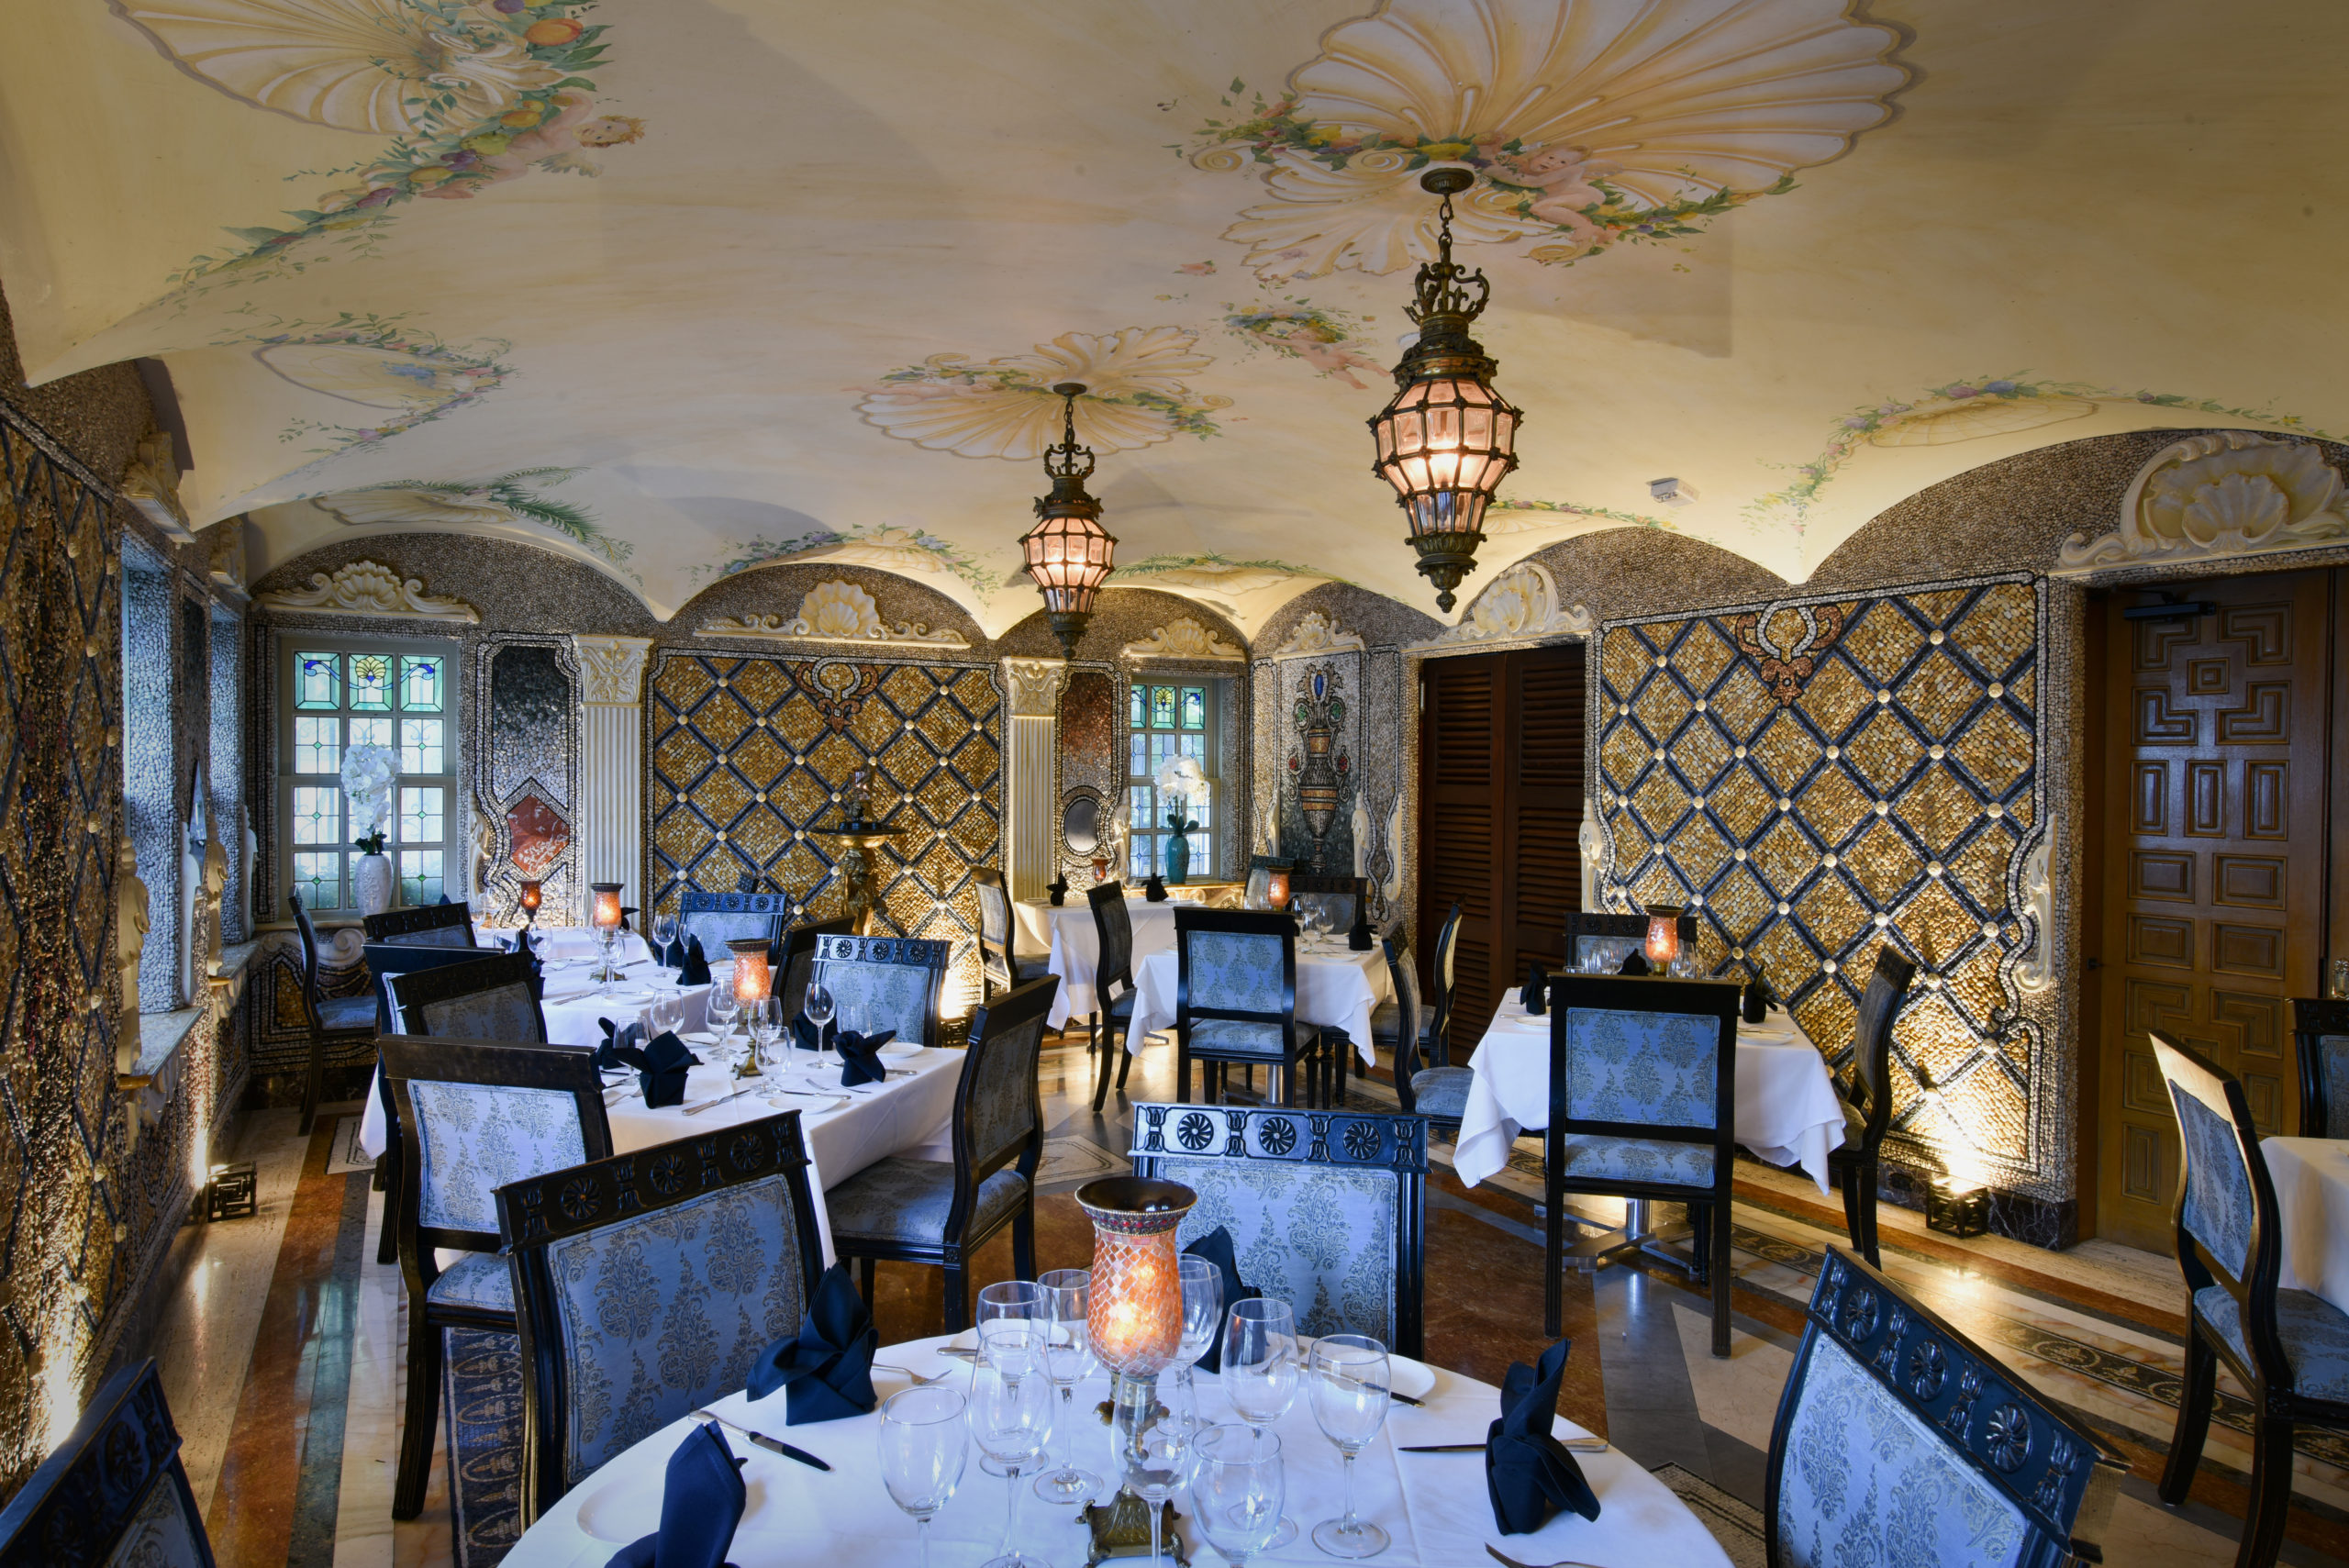 traditional fine dining space with mosaic tile work on walls and stained glass windows in the distance